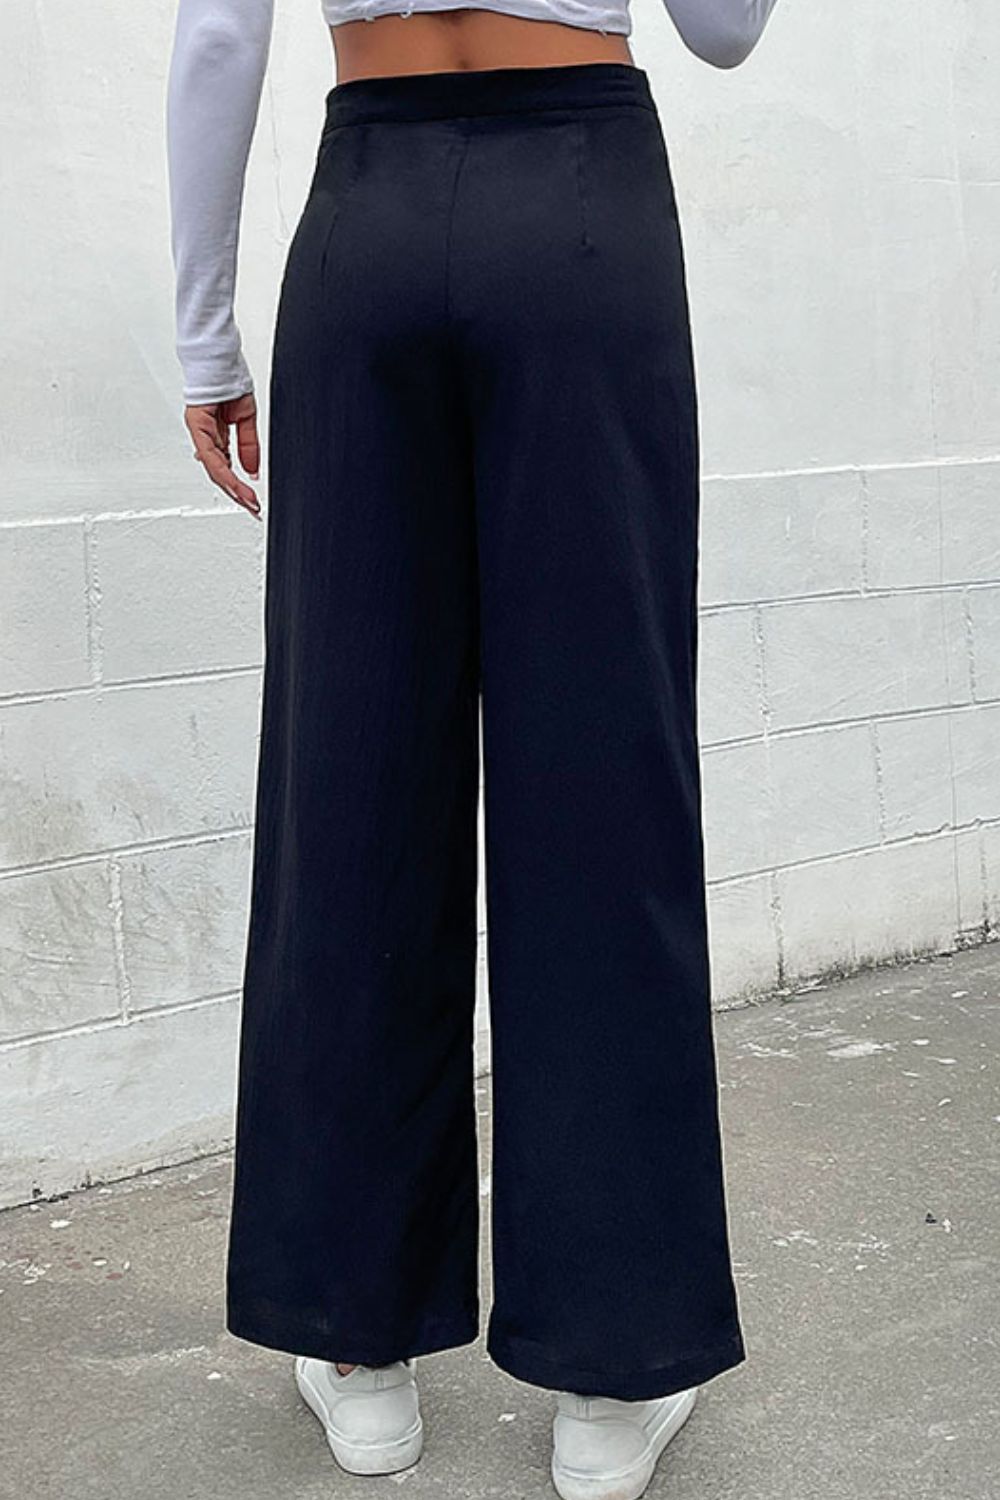 Work Wear Wednesday - Pull On Wide Leg Pant – Tuttle Party of 5